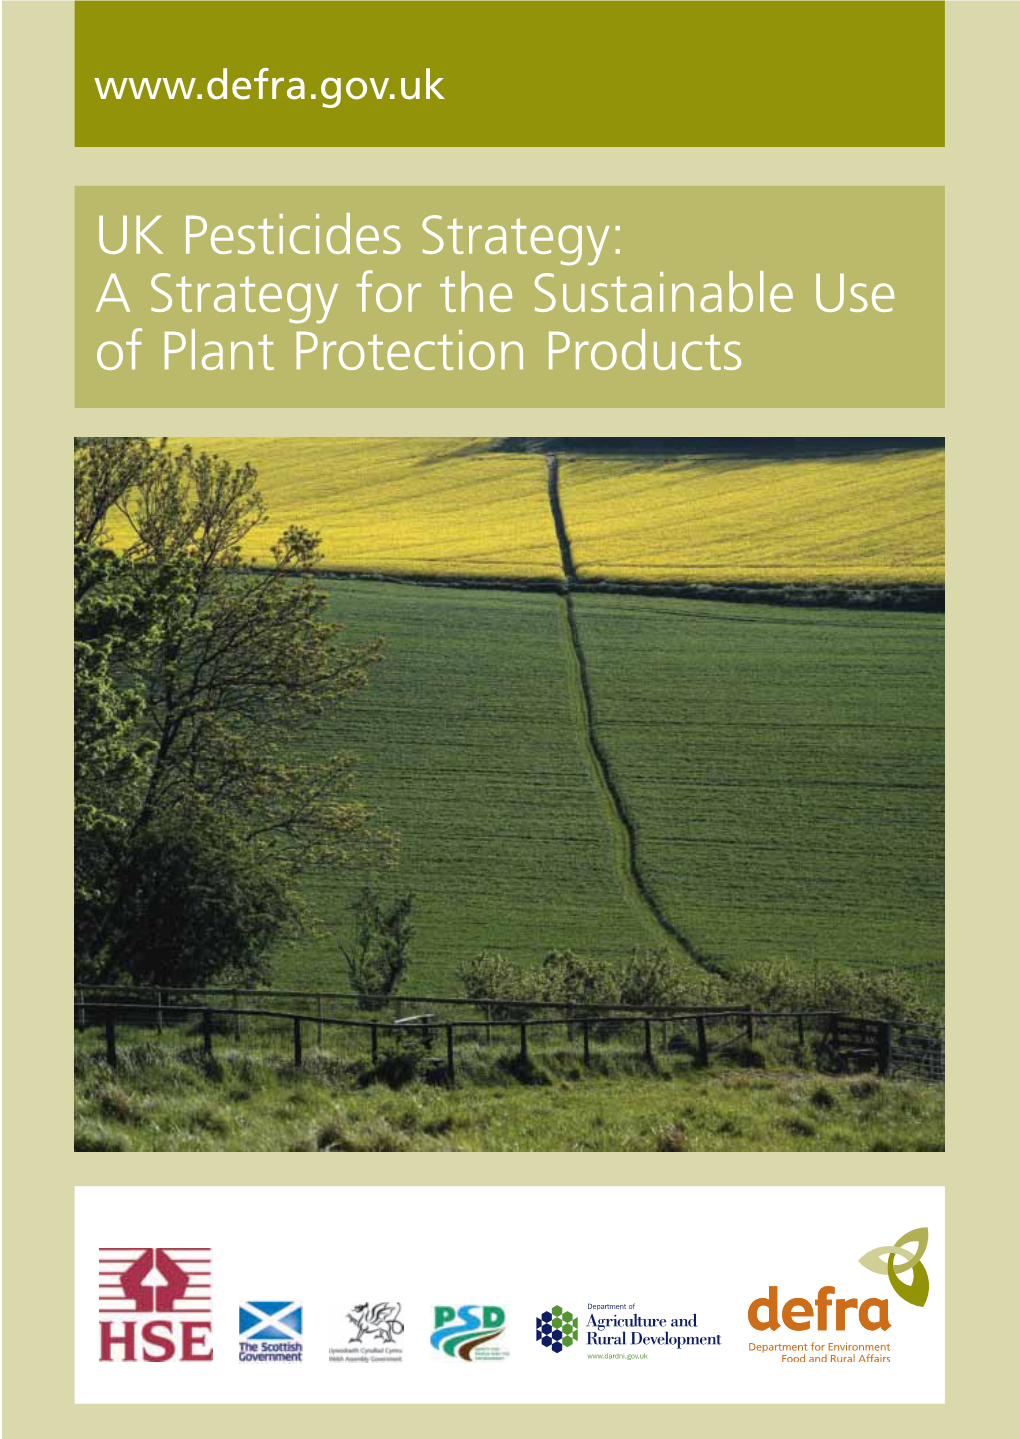 A Strategy for the Sustainable Use of Plant Protection Products and Strategy Action Plans: March 2006 3 DEF-PB13035-Pestplan 30/4/2008 13:45 Page 4